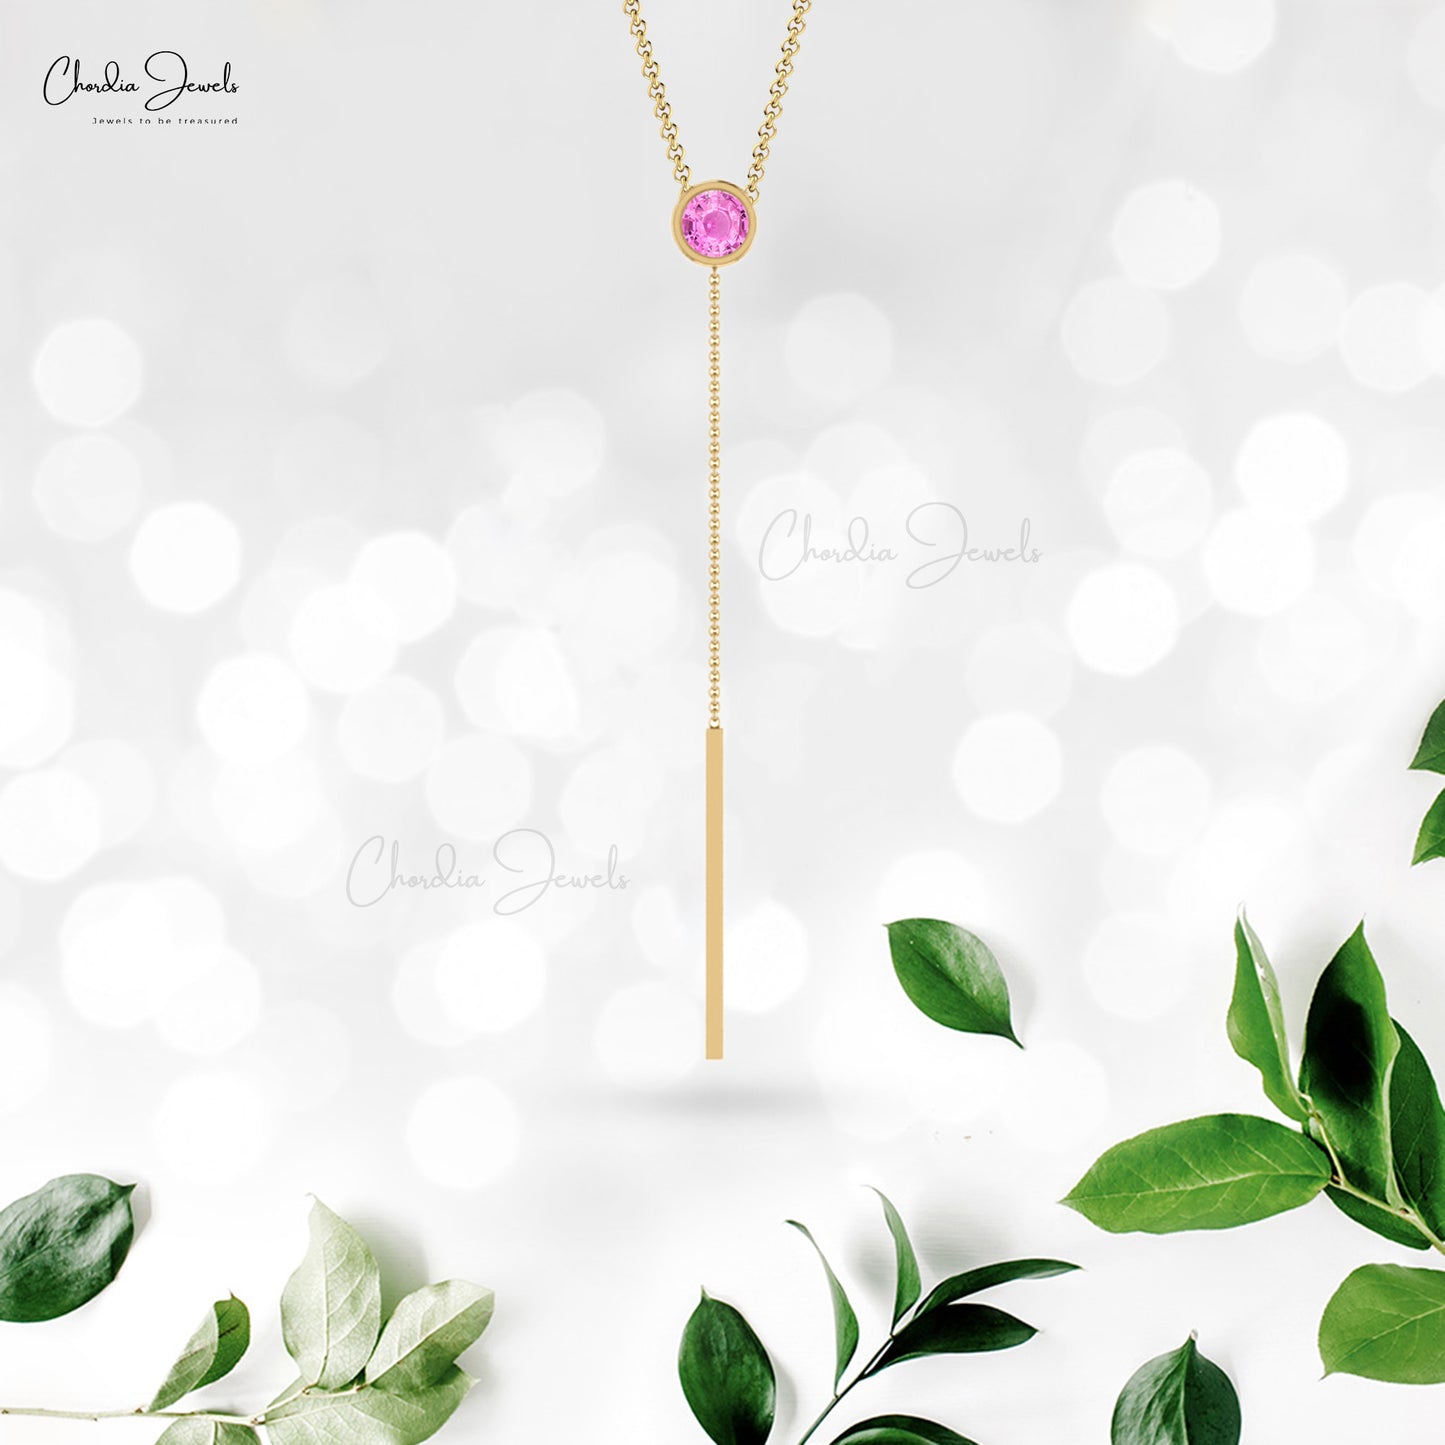 Iconic Pink Sapphire Dainty Necklace Genuine 14k Real Gold Lariat Necklace 3.5mm Round Gemstone Bezel Set Necklace For Fiance Gift